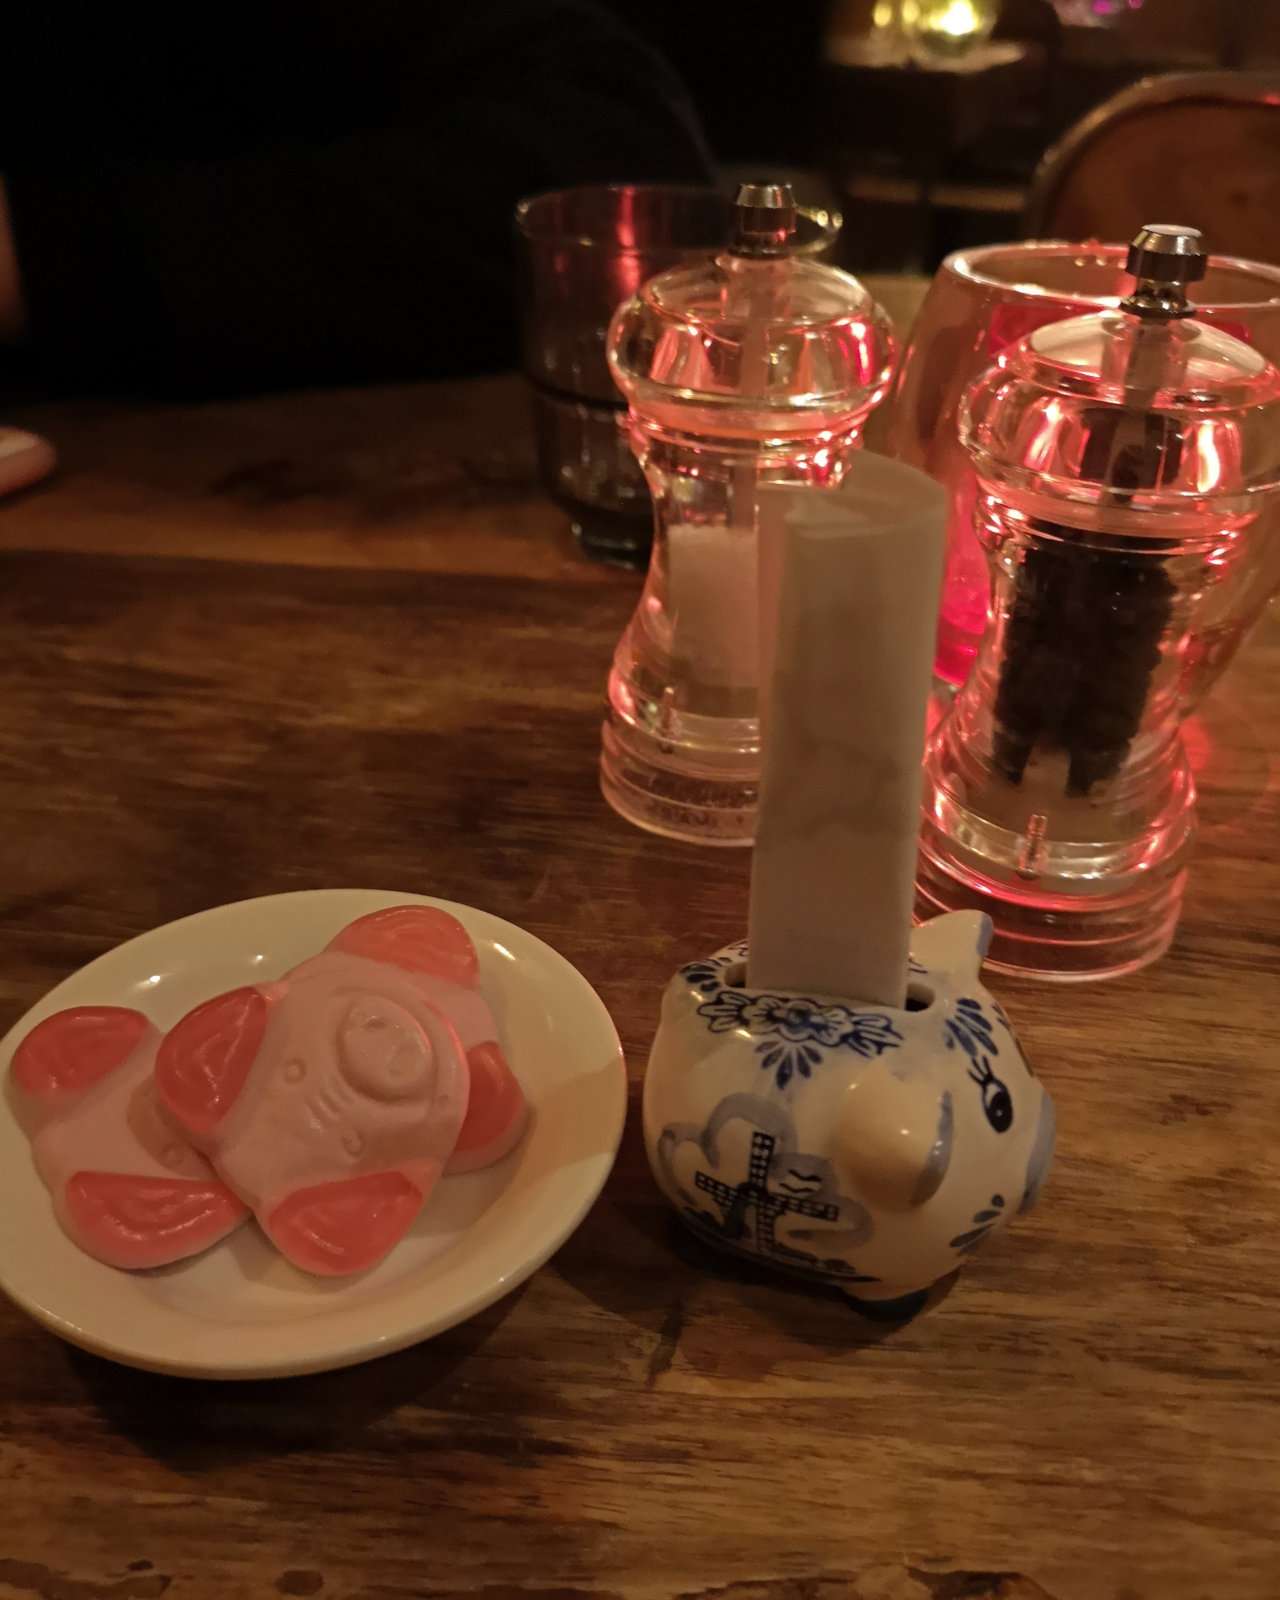 Pigs & Punch is one of the coolest places to eat in Amsterdam